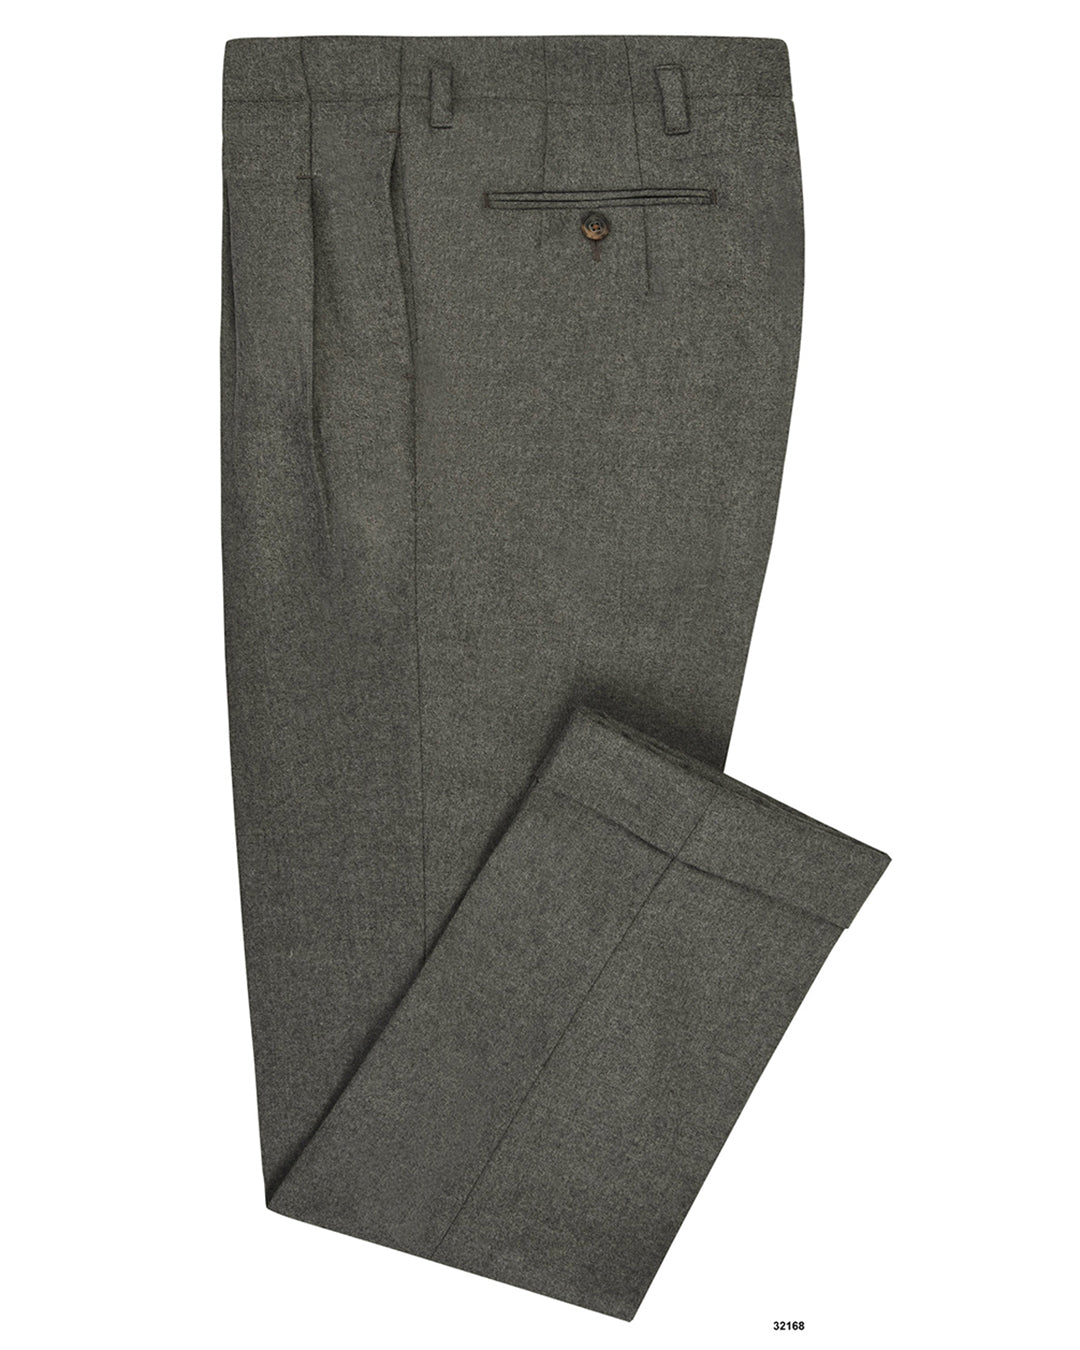 Minnis Flannel: Grey Worsted Pants